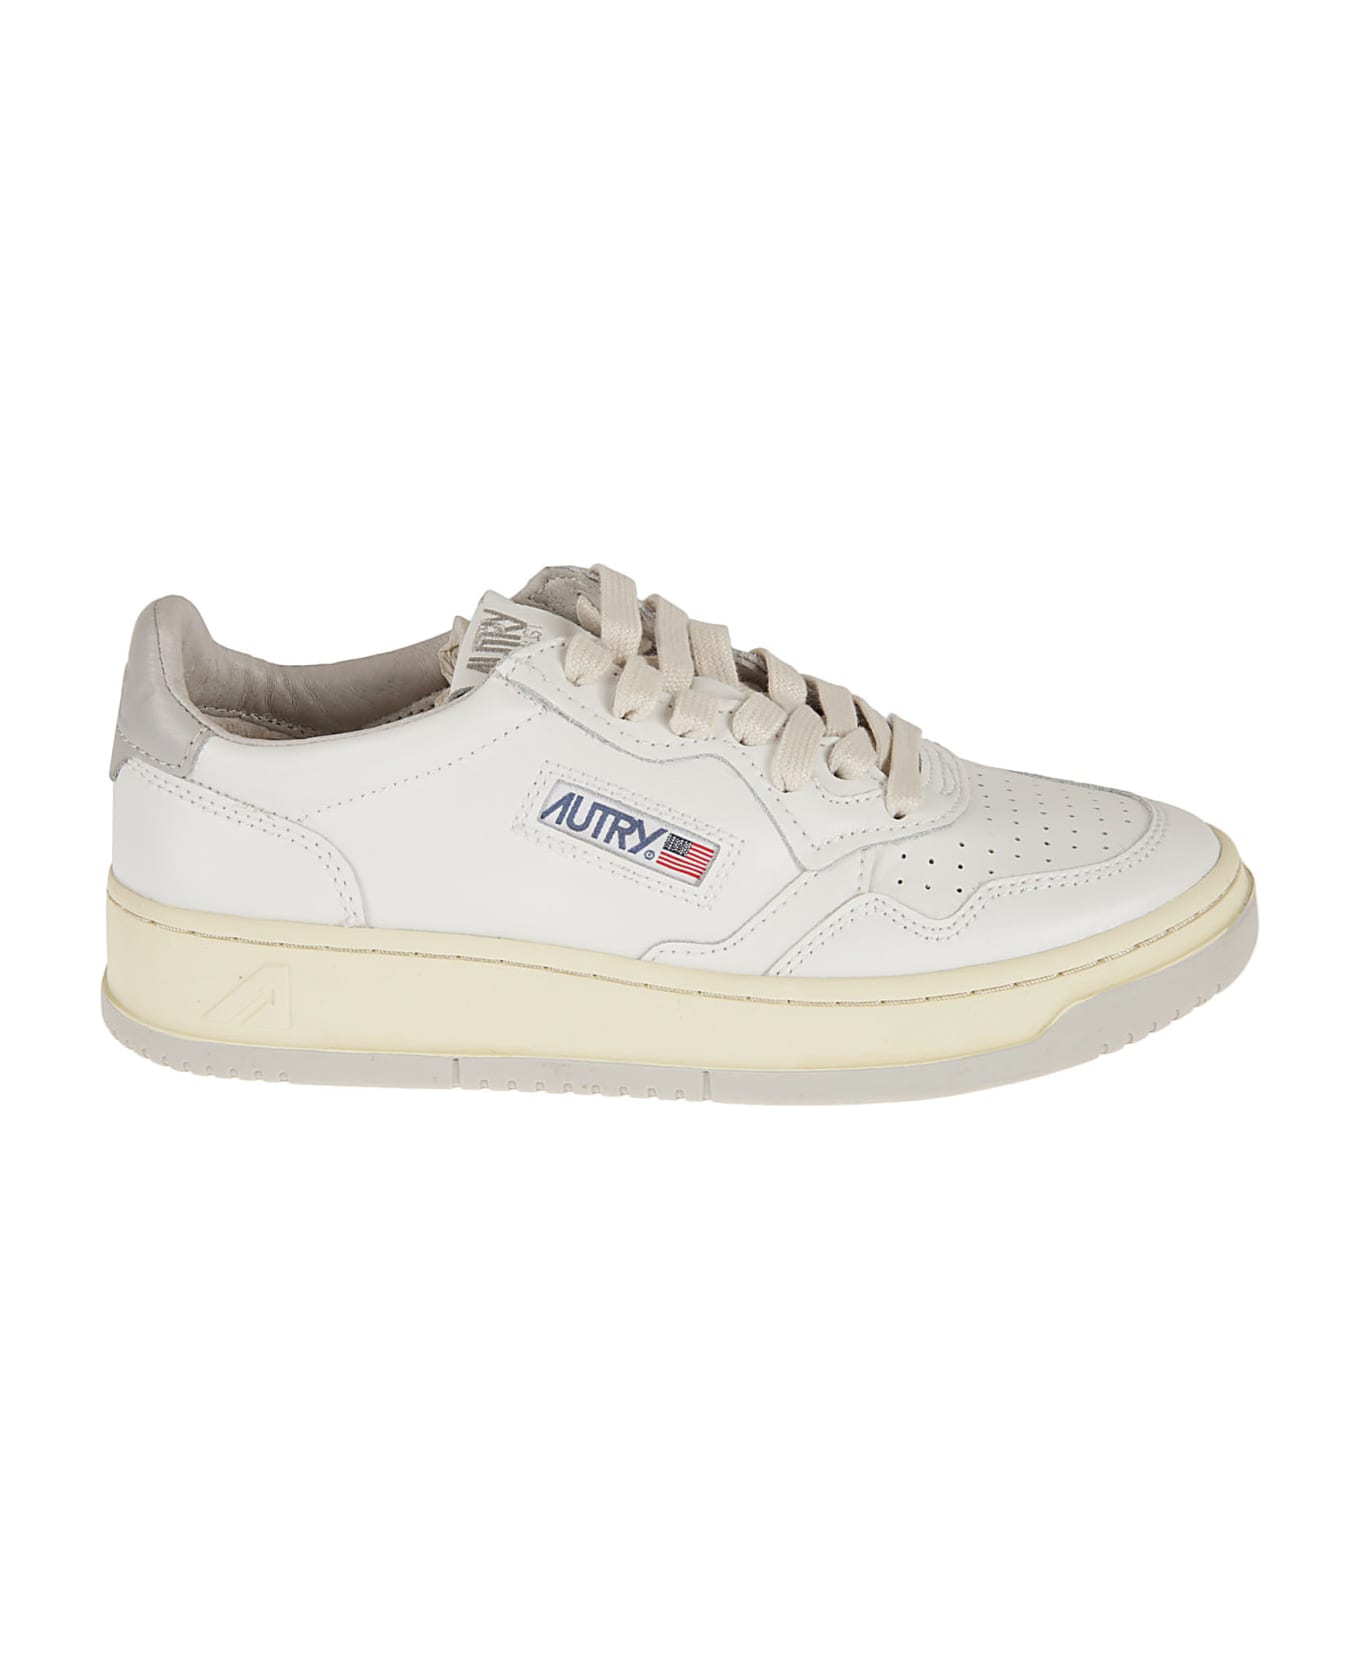 Autry Logo Patched Low Sneakers - White/Vap